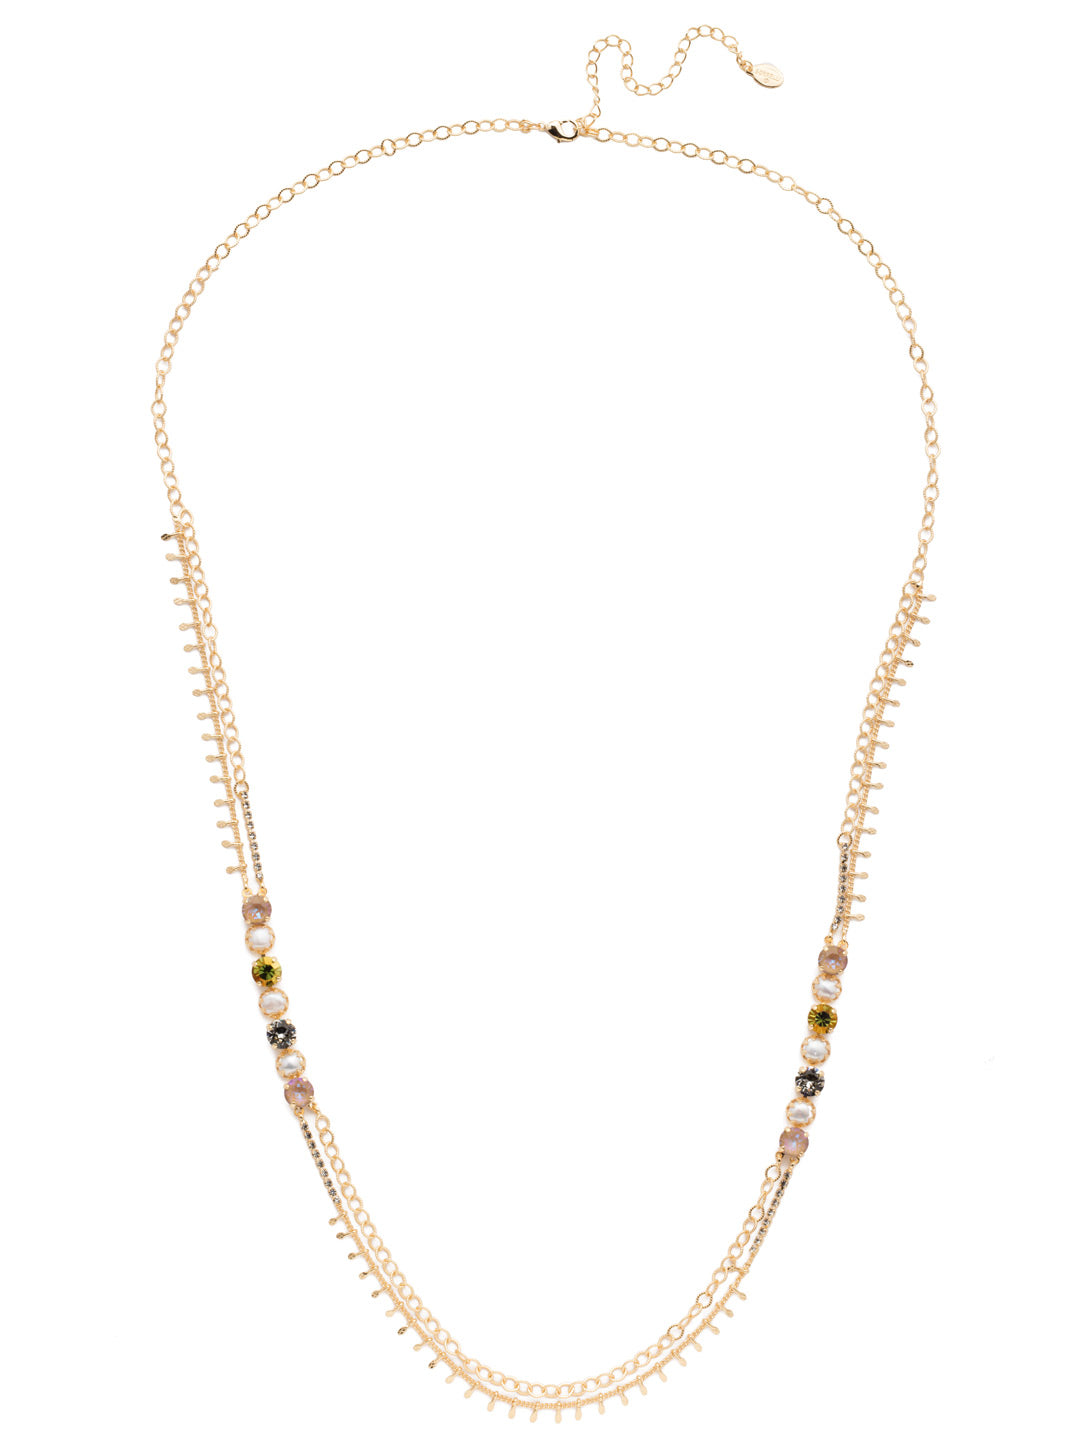 Oaklyn Long Necklace - NEP1BGCSM - <p>Dainty and unique metallic details, dark and light sparkling crystals and the polish of classic pearls come together in our Oaklyn Tennis Necklace. From Sorrelli's Cashmere collection in our Bright Gold-tone finish.</p>